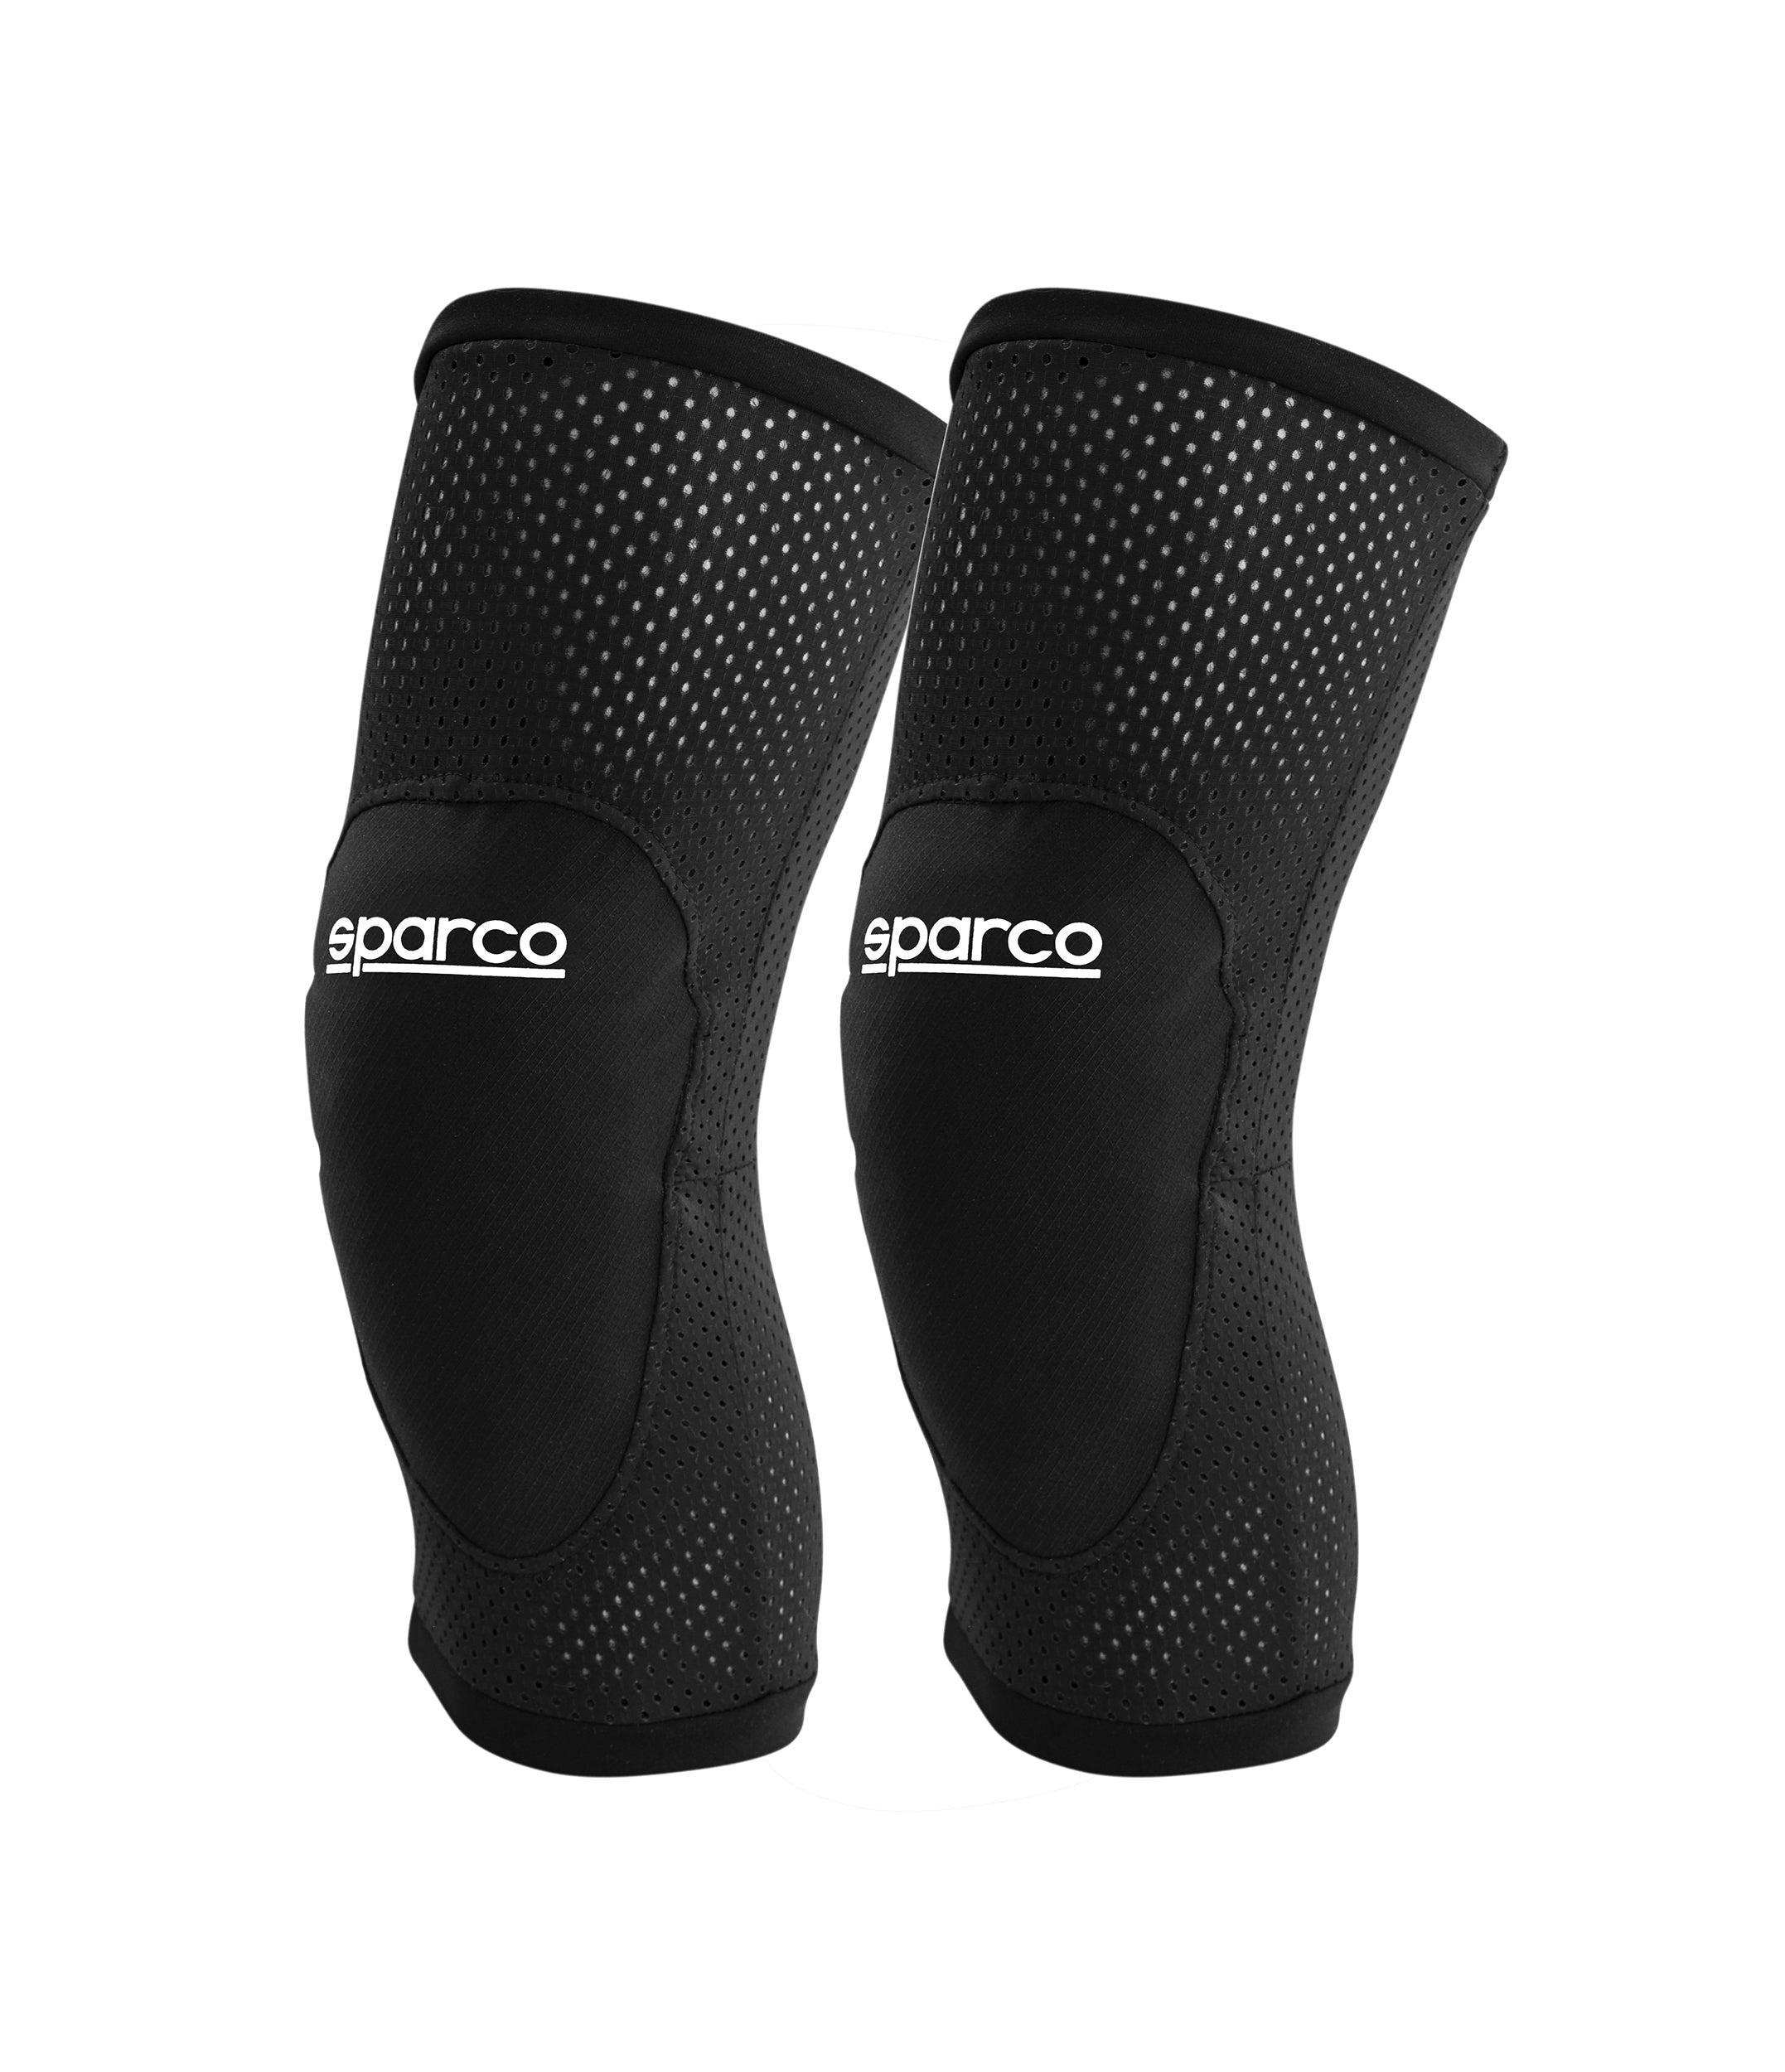 SPARCO 001541KNR1S Knee pads for karting, black, size S Photo-0 